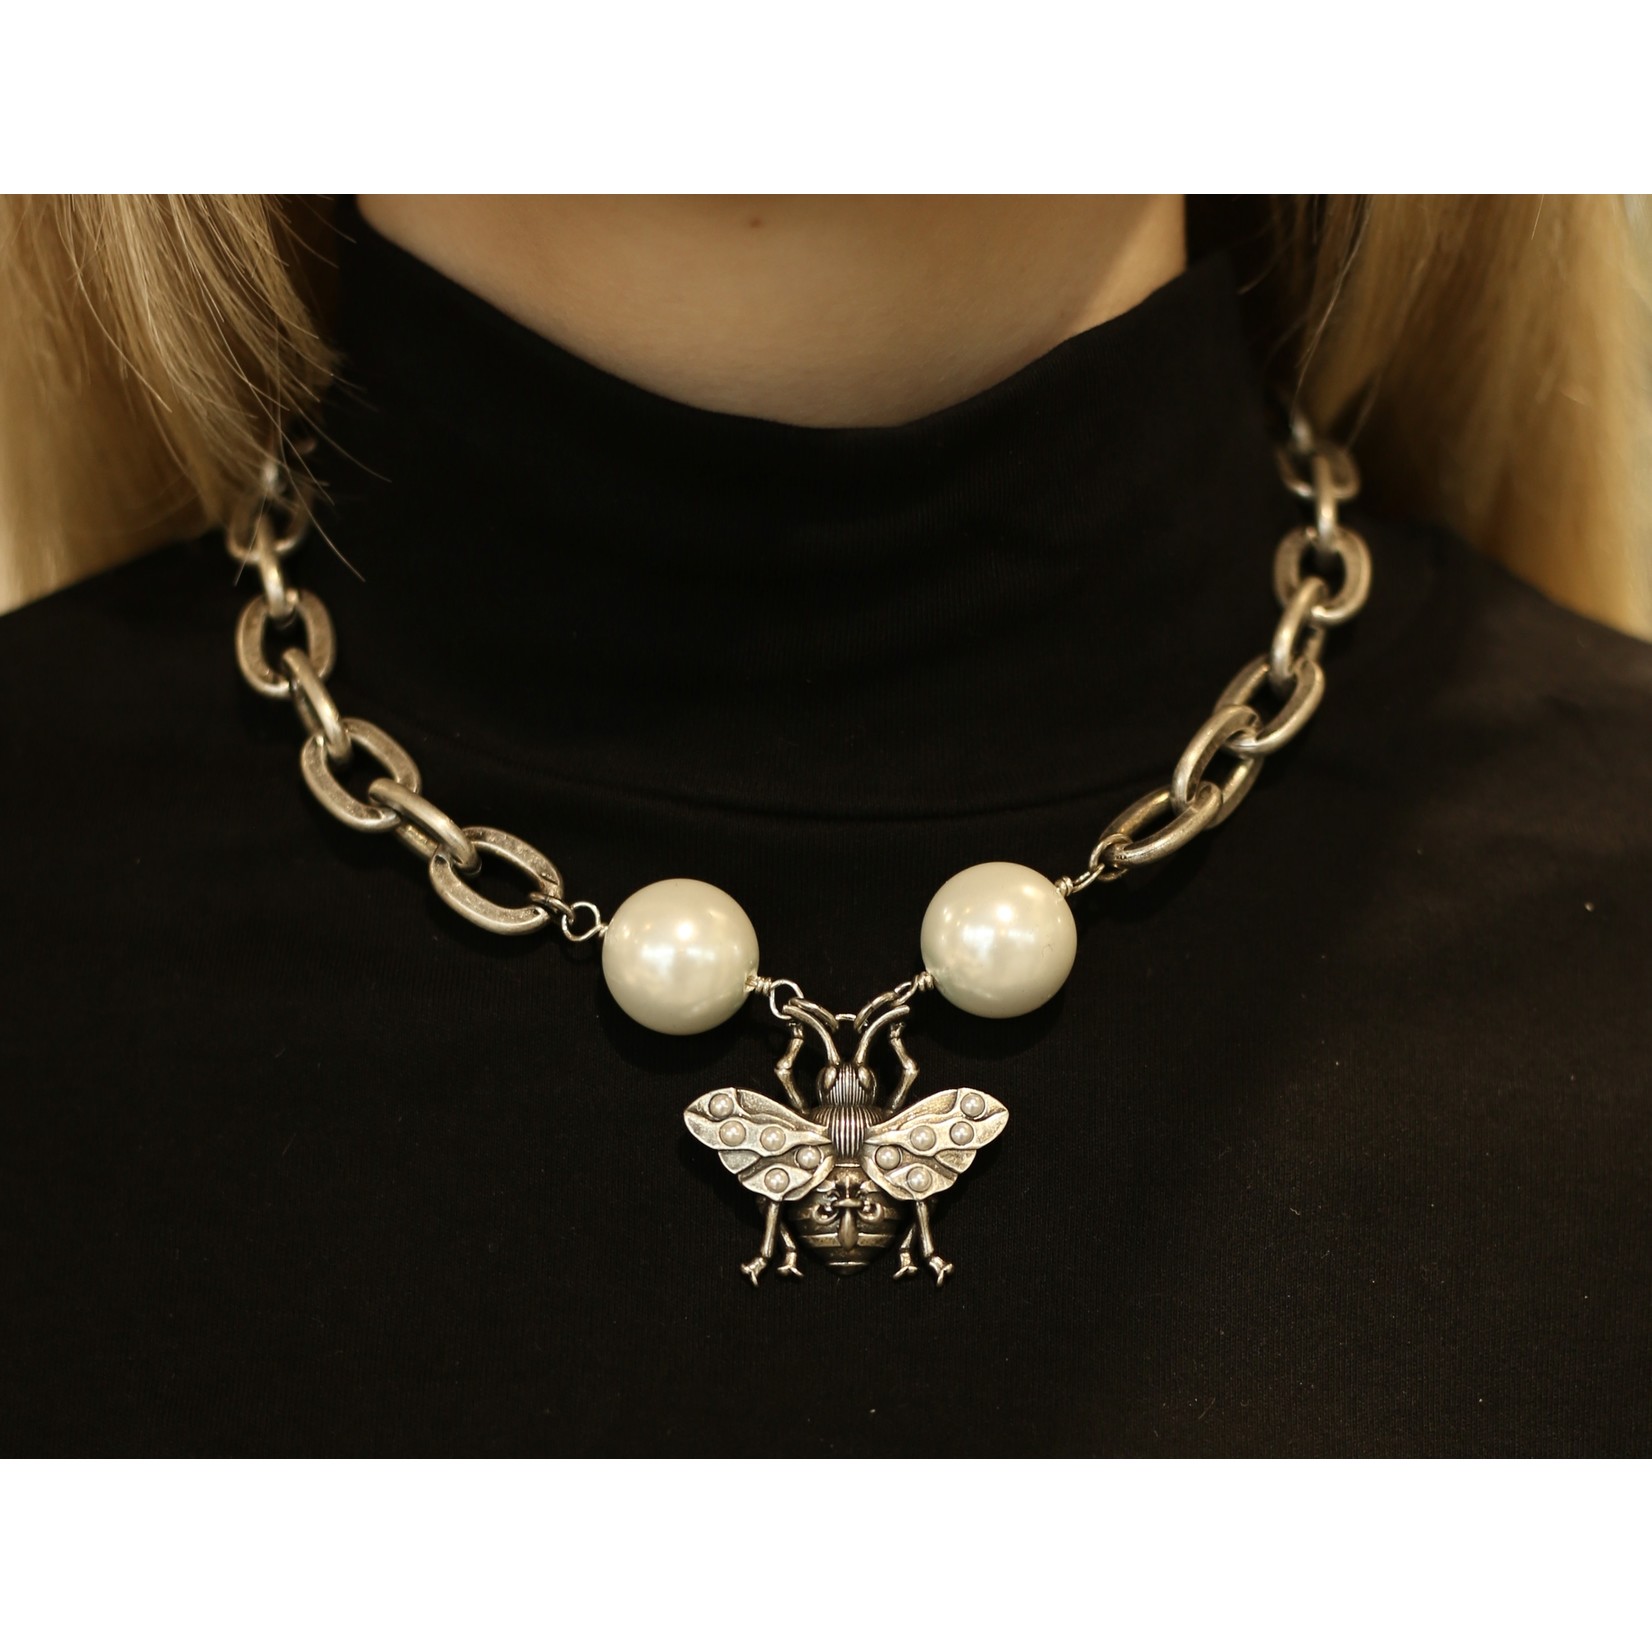 French Kande Lourdes Chain with Pearl + Bee Pendant